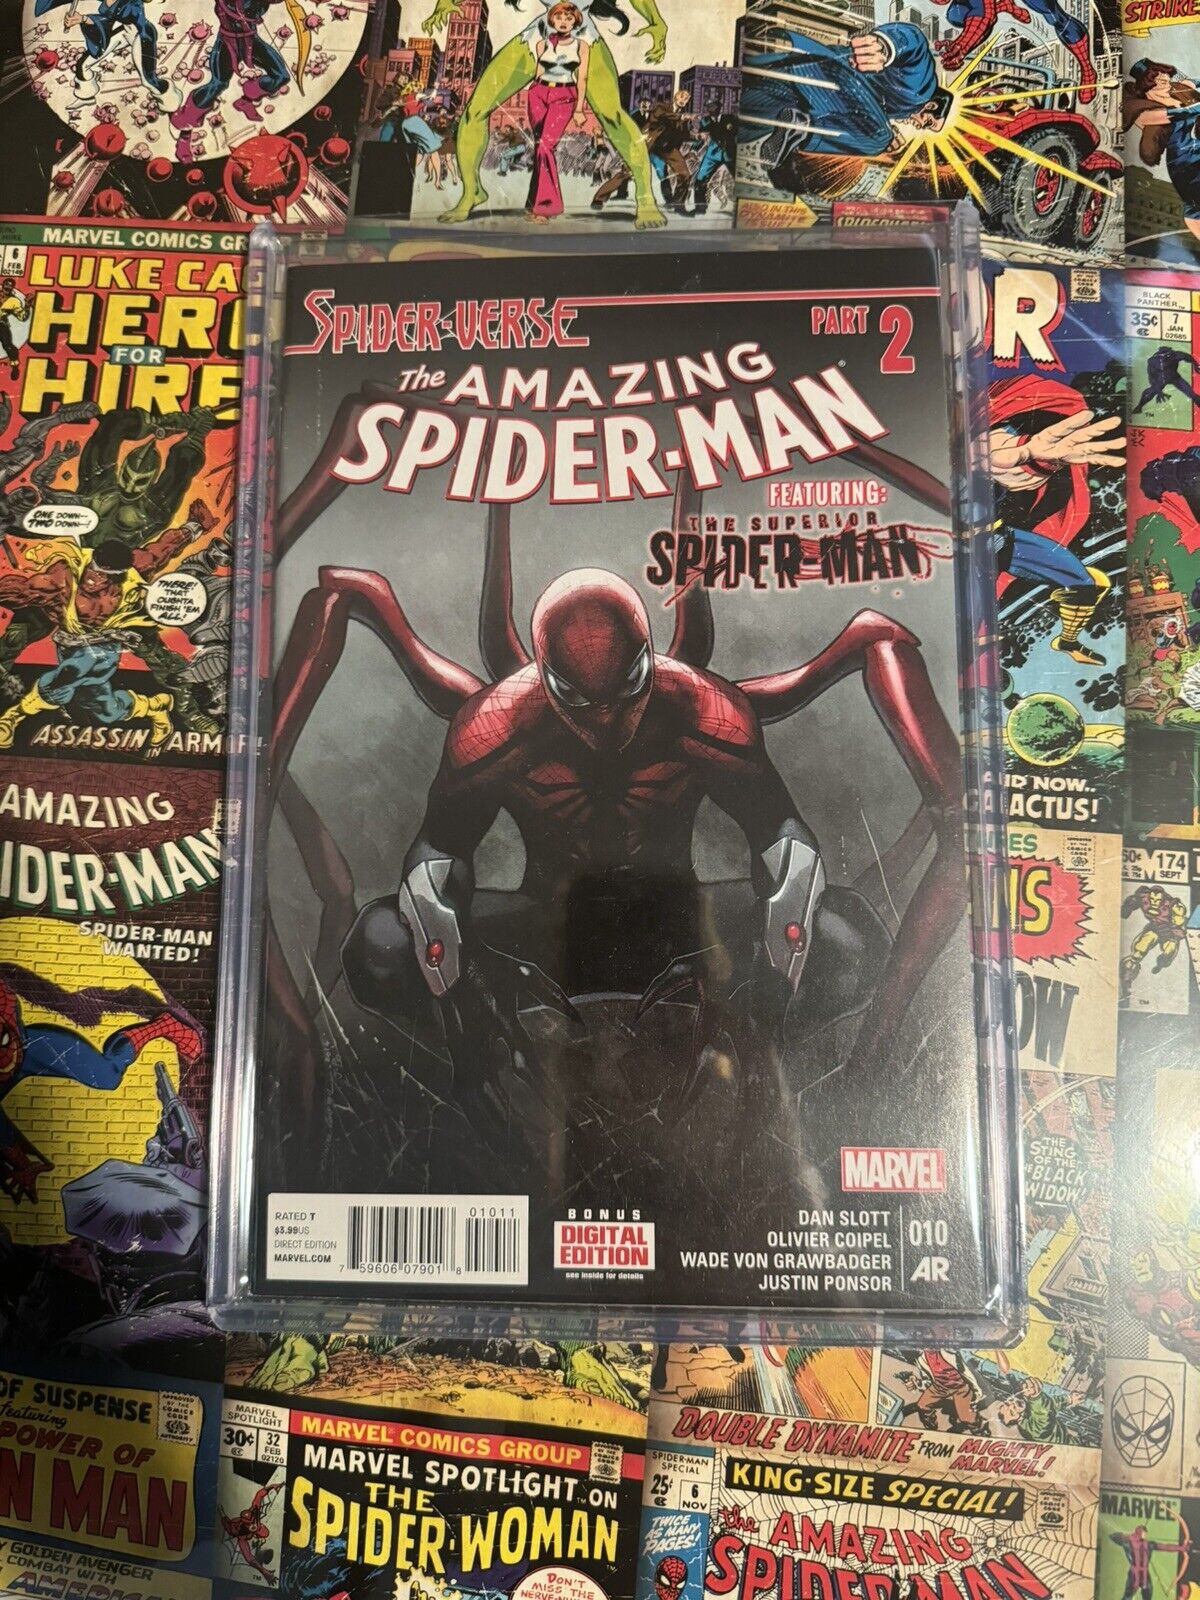 Amazing Spider-Man #10 (Marvel Comics 2015) 1st appearance of Spider-Punk